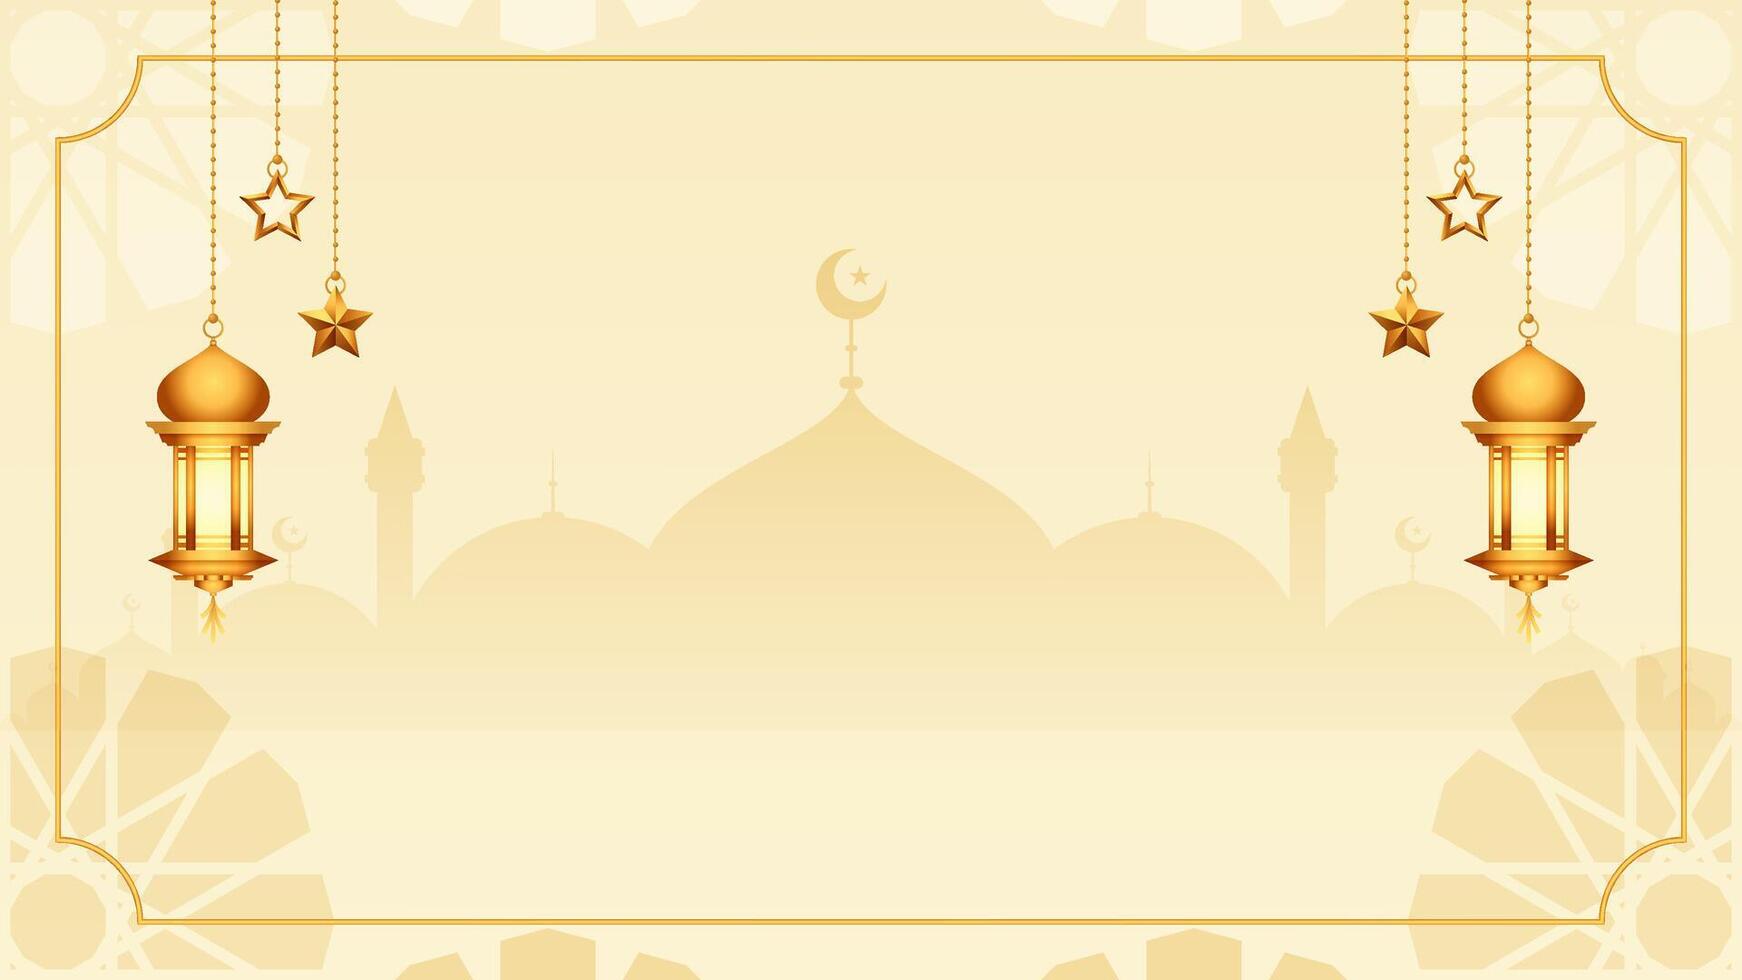 Satin Cream White Simple Islamic Blank Horizontal Vector Background Decorated With Hanging Lantern And Golden Stars